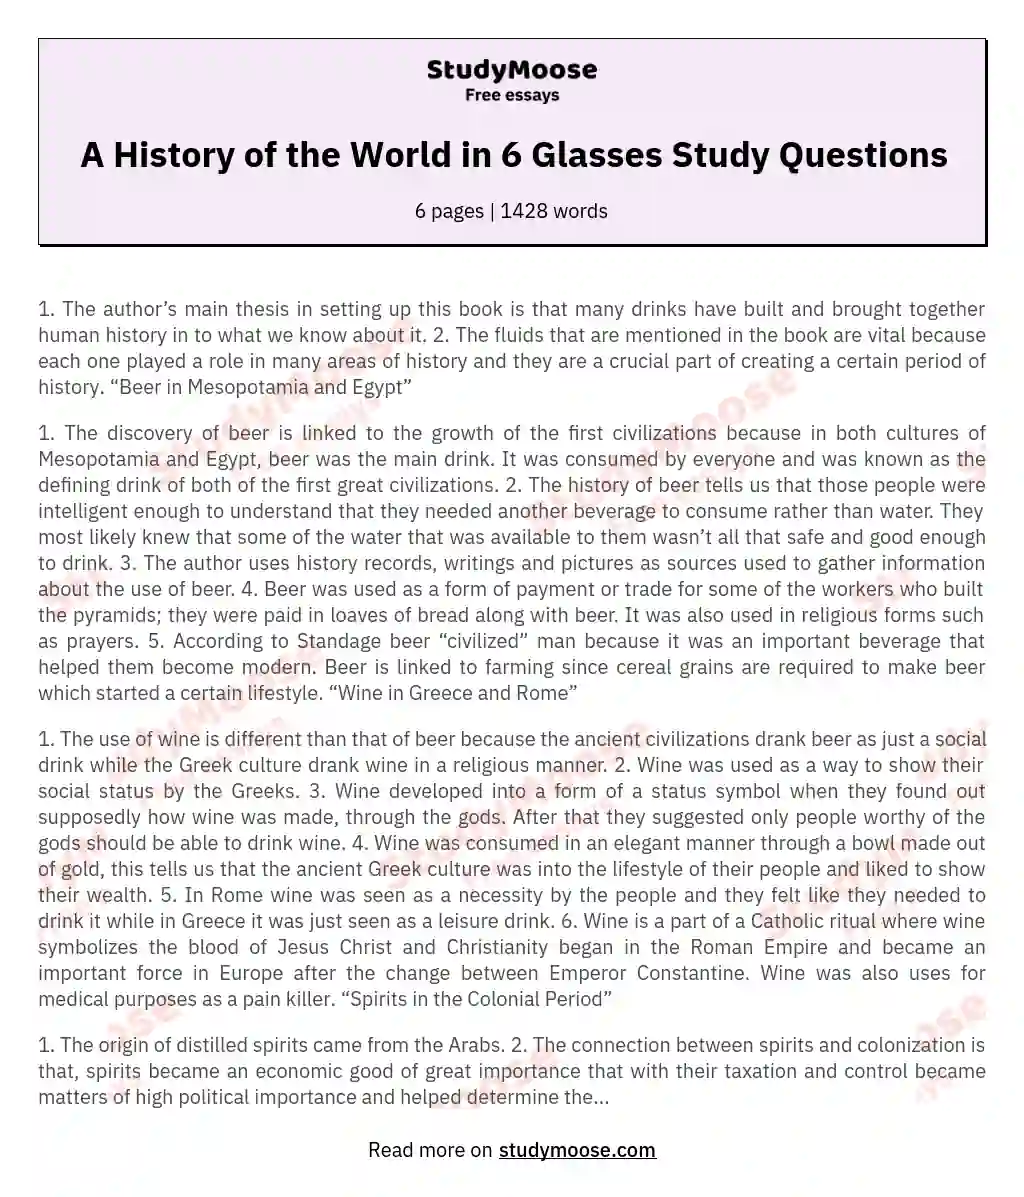 A History of the World in 6 Glasses Study Questions essay